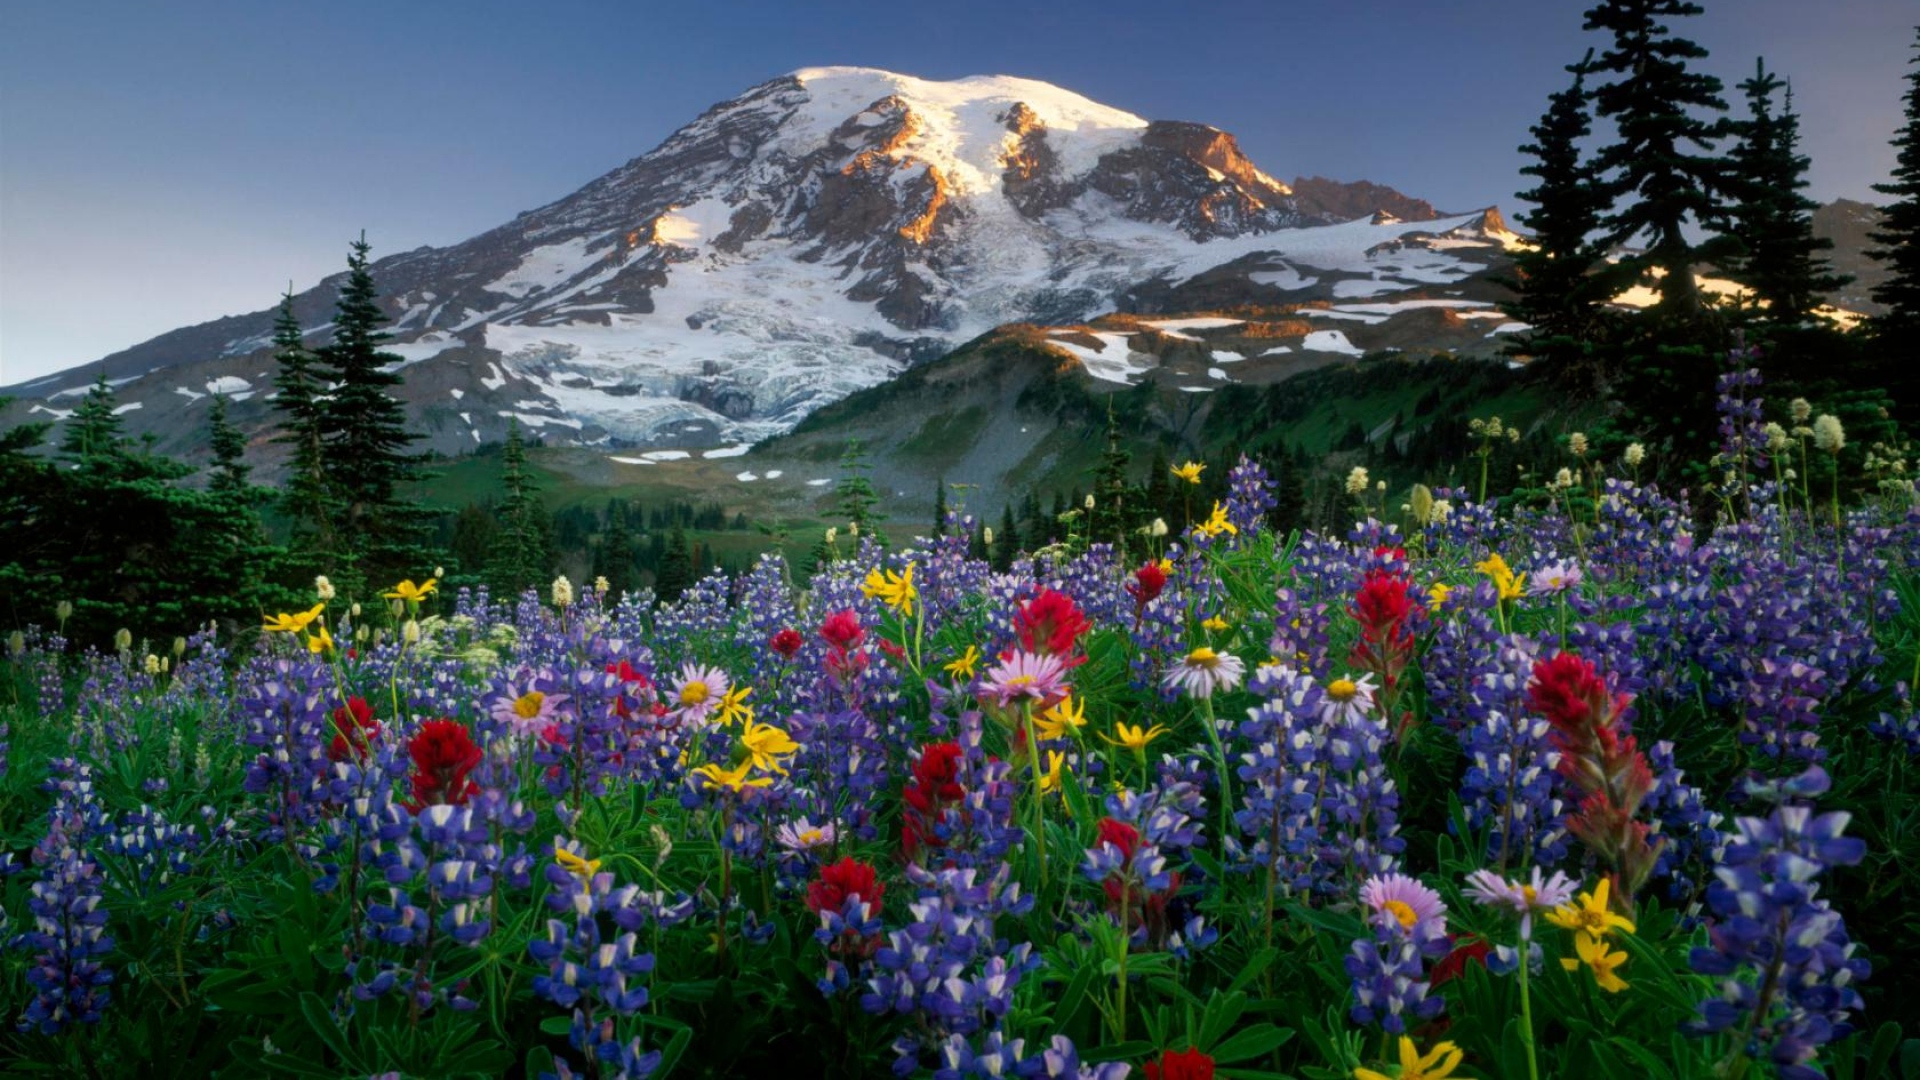 lupines_flowers_fields_mountains_trees_nature_snow_33568_1920x1080